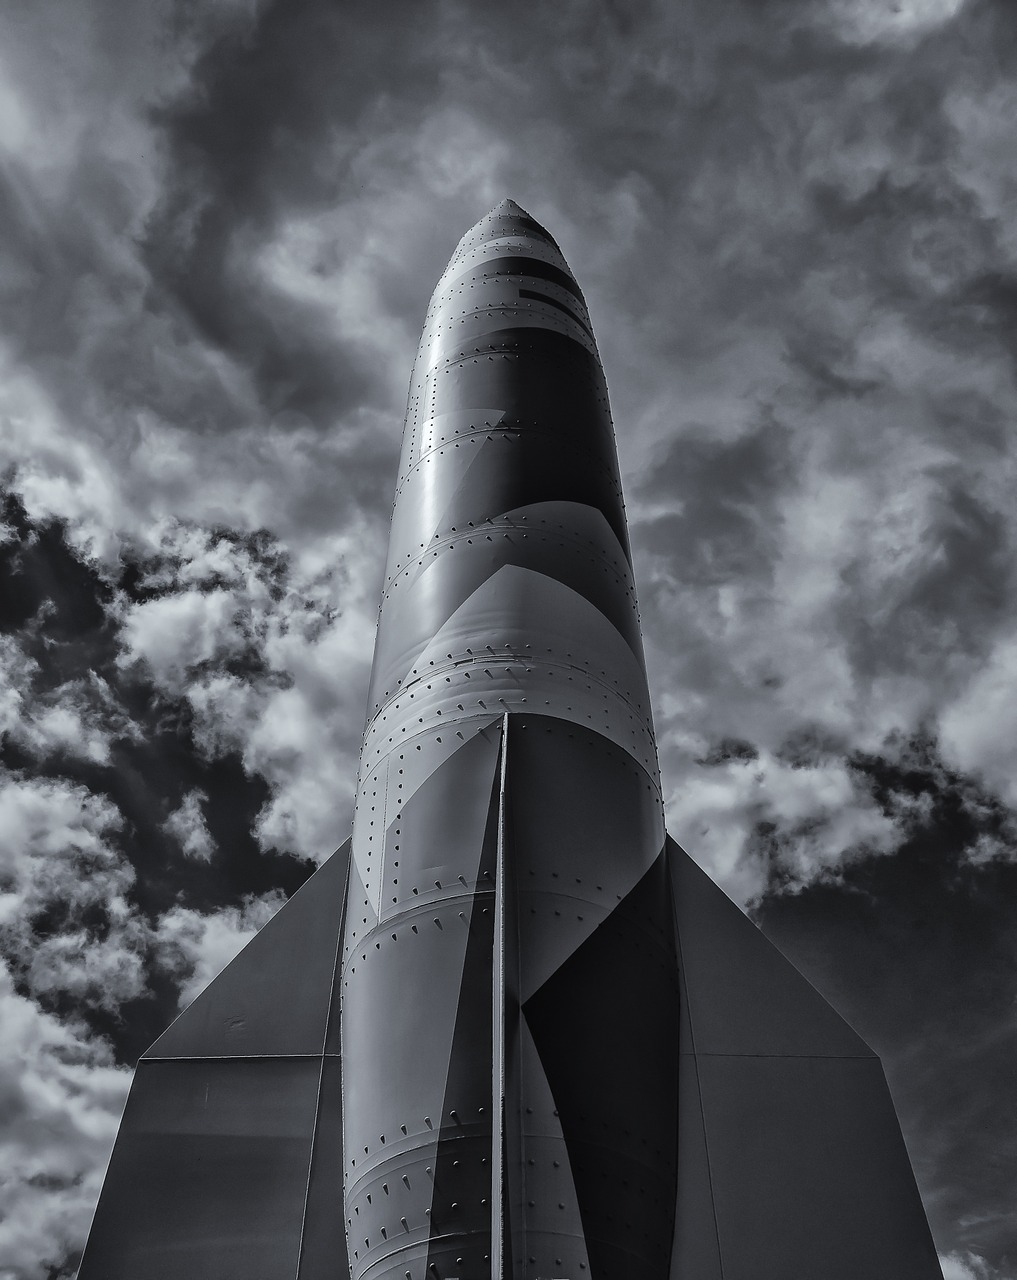 a greyscale image of a large rocket